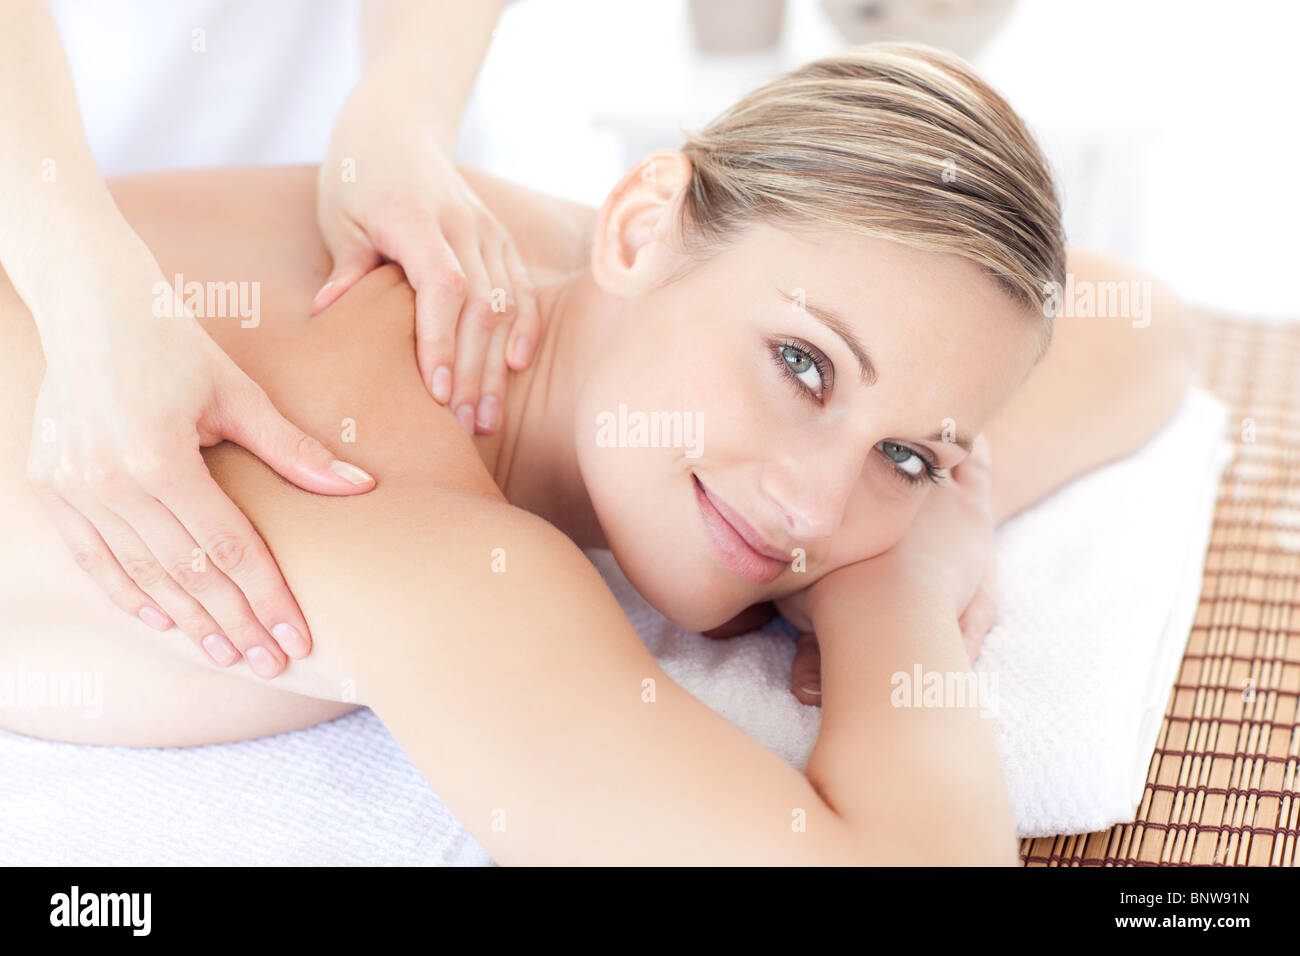 Smiling woman receiving a back massage Stock Photo